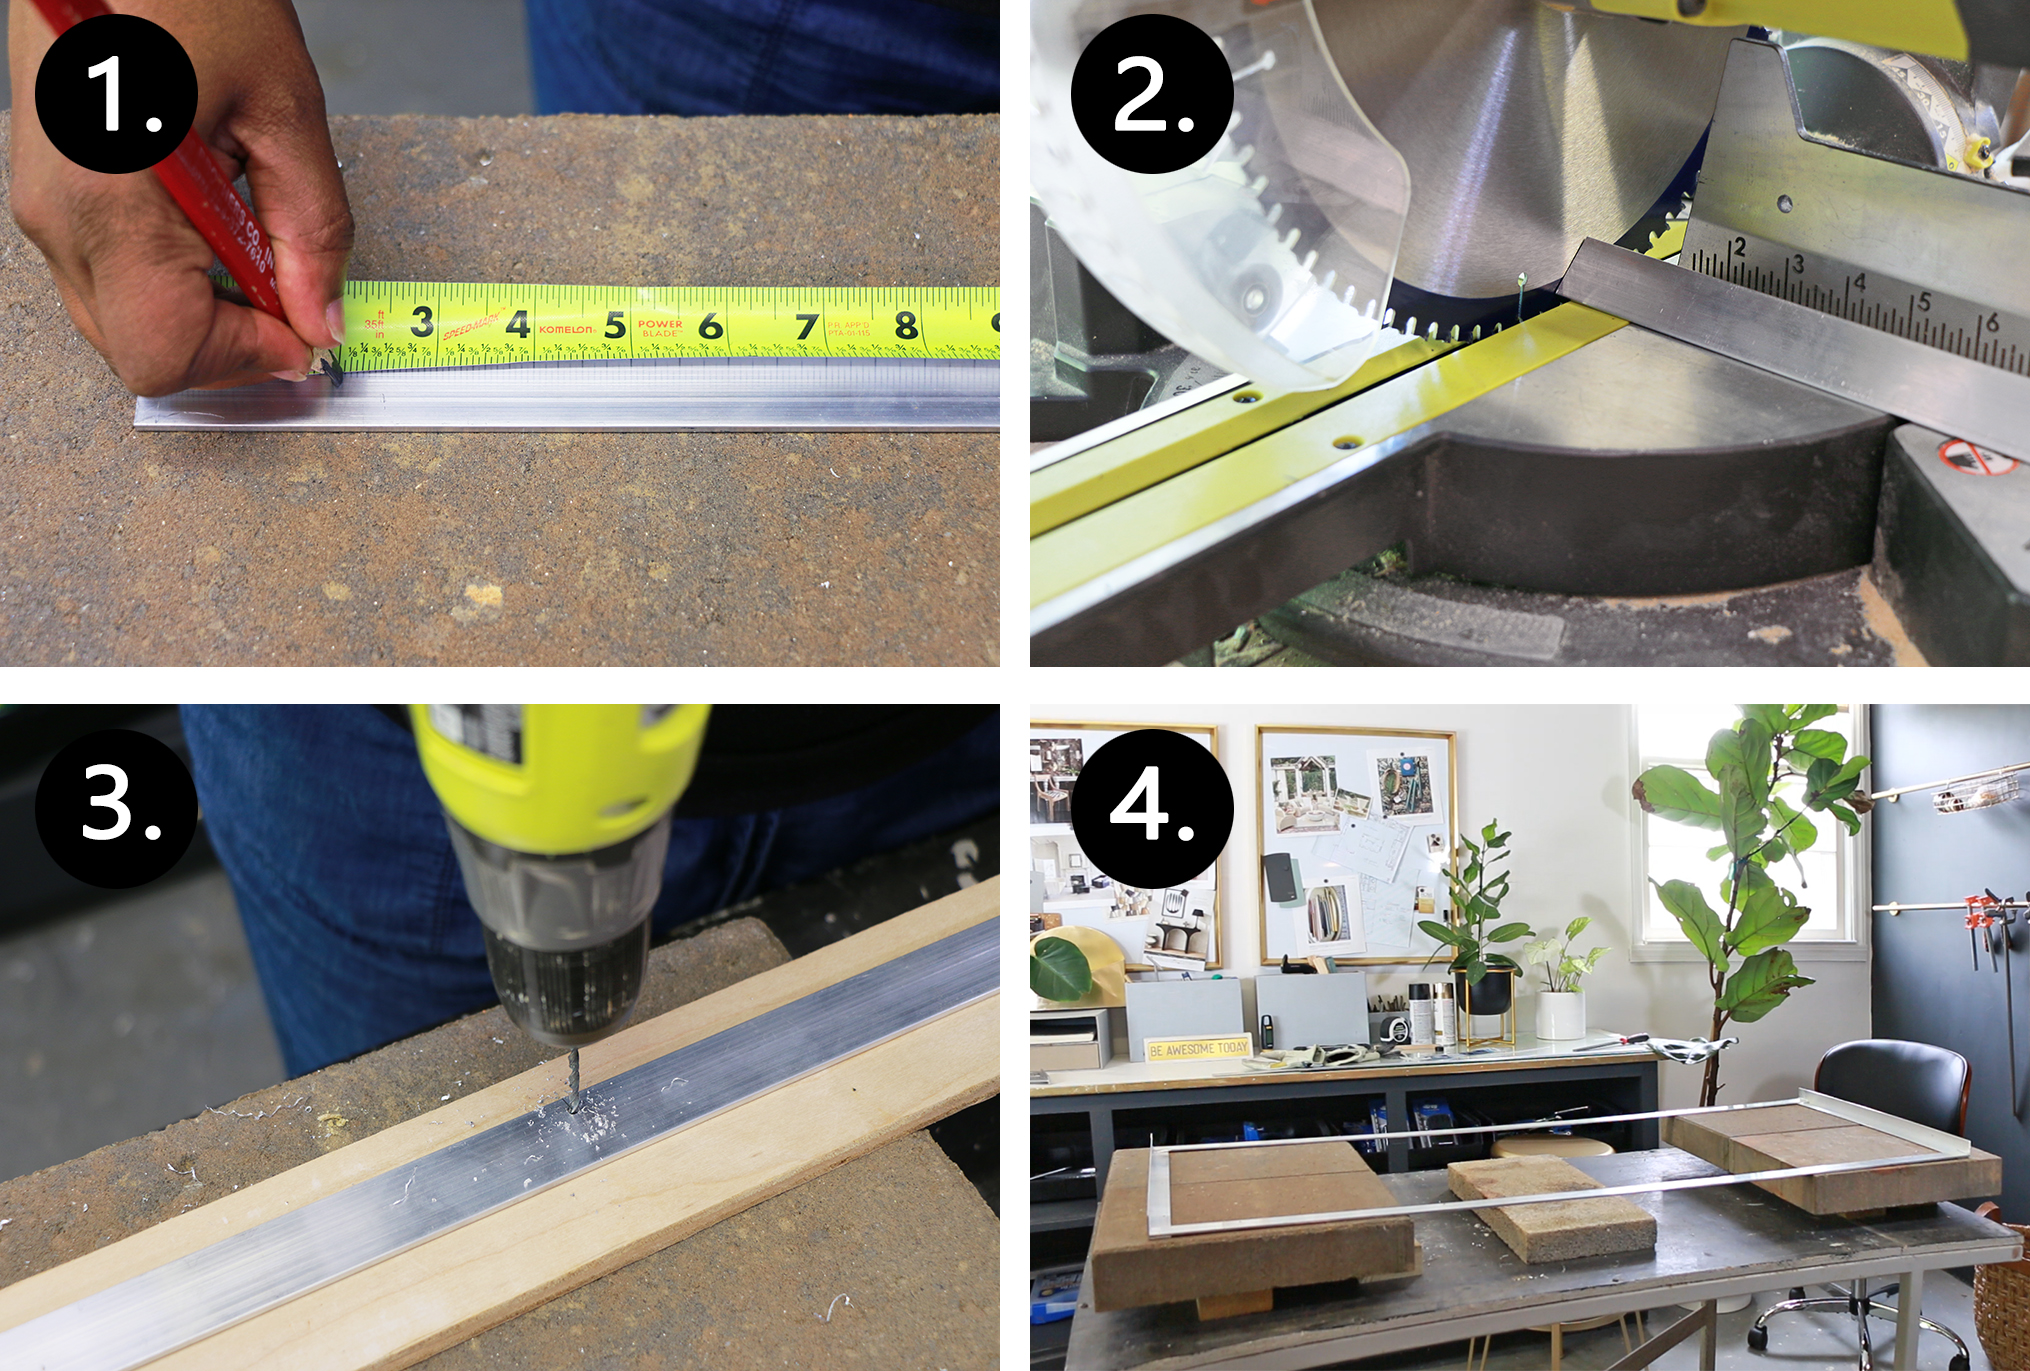 Measuring, cutting, drilling and laying out parts